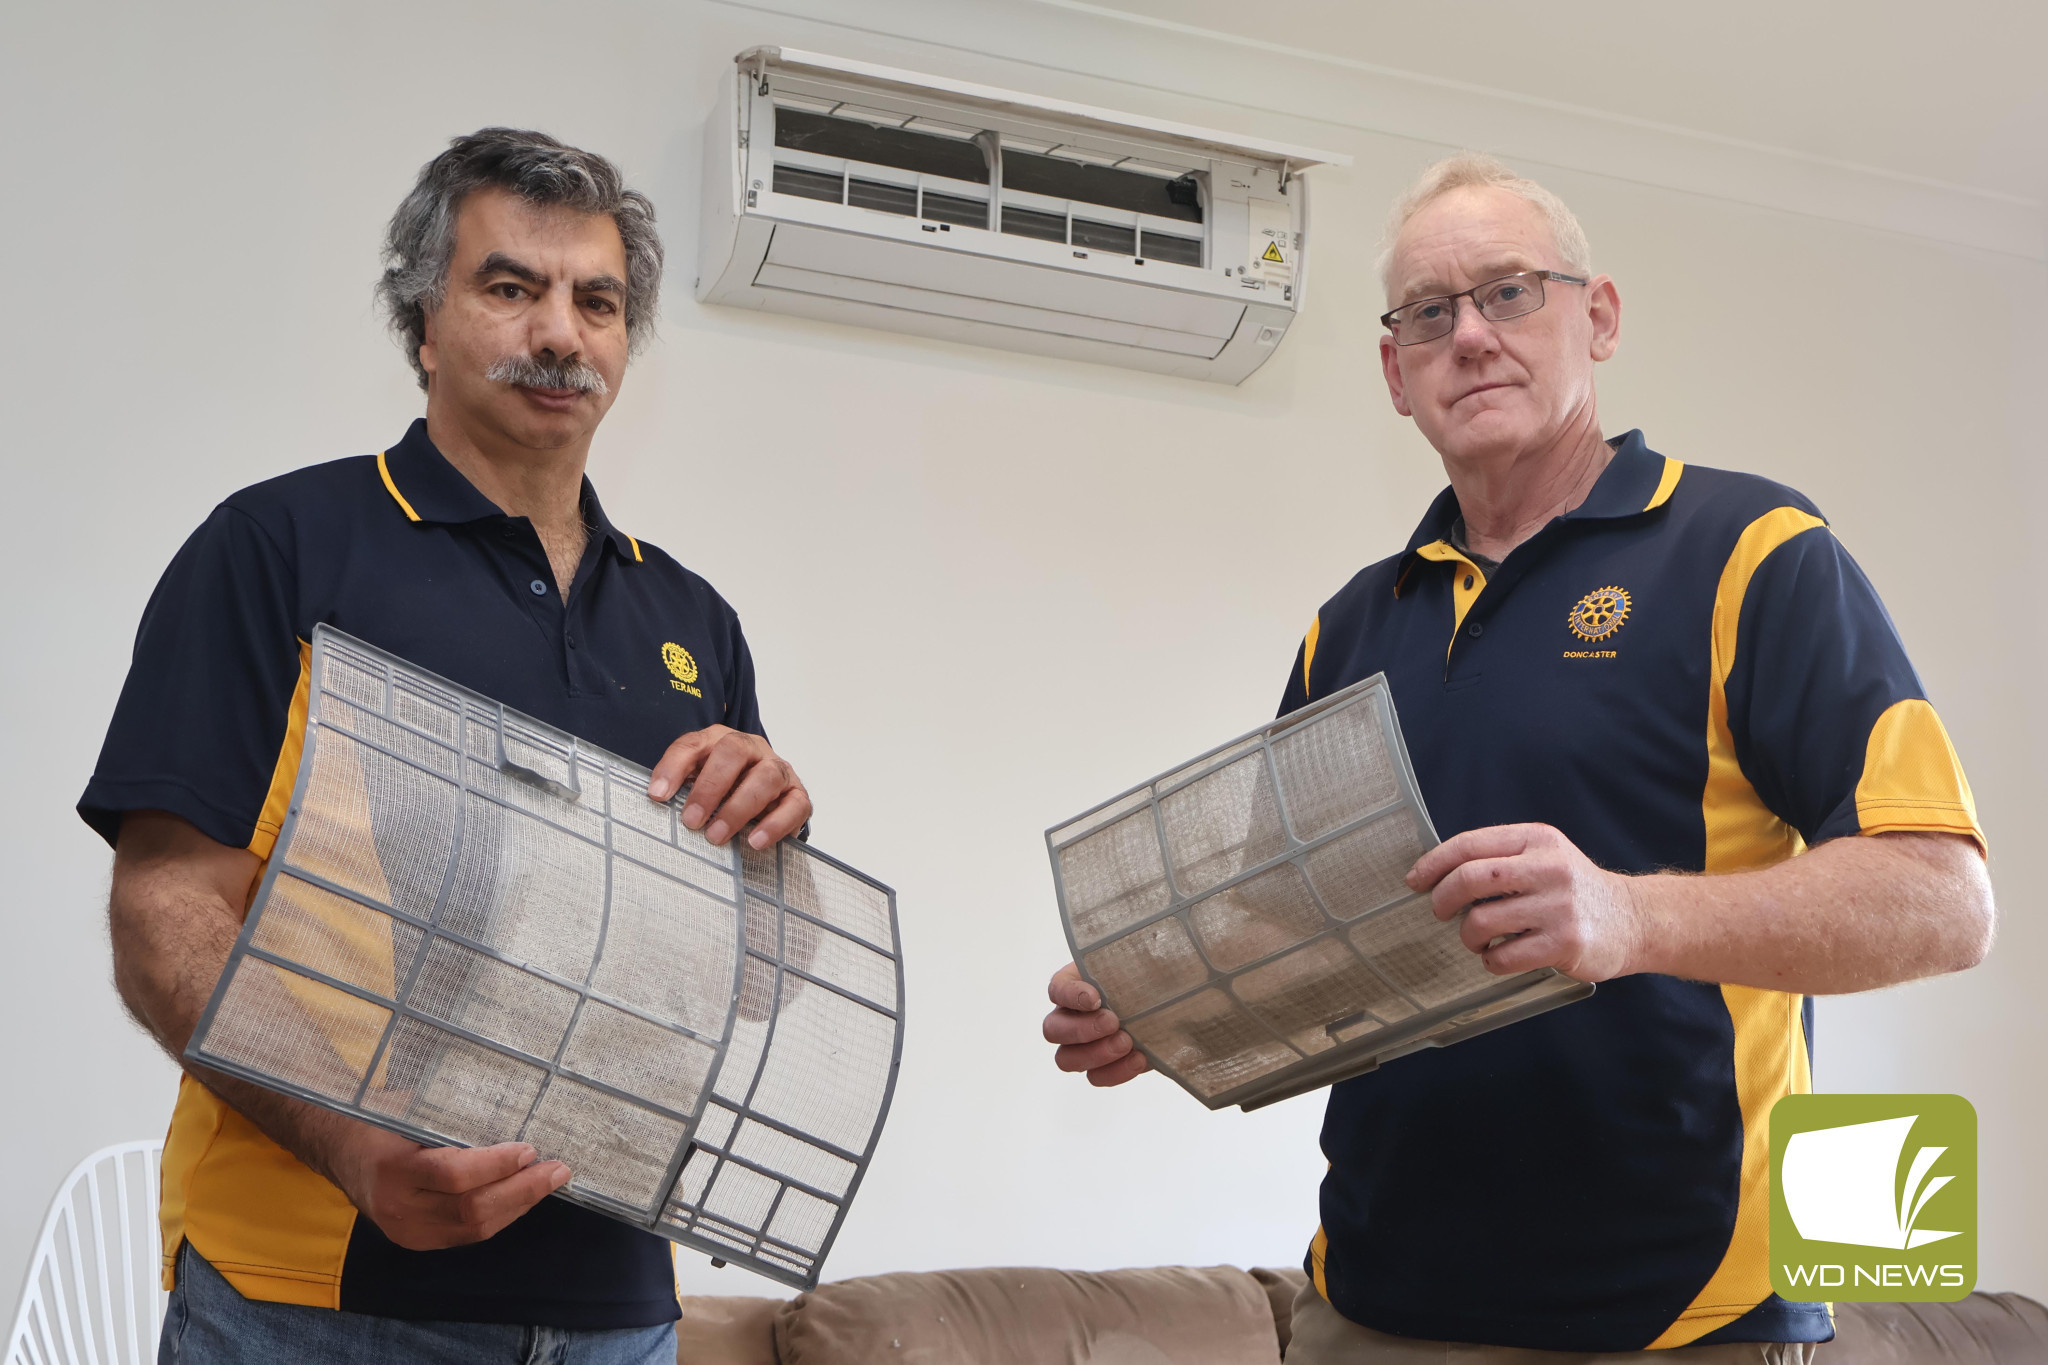 Giving back: Terang and District Rotary Club members Wayne Reicha and Paul Blain will launch a free service helping disadvantaged members of the community with cleaning their split system air conditioning units.